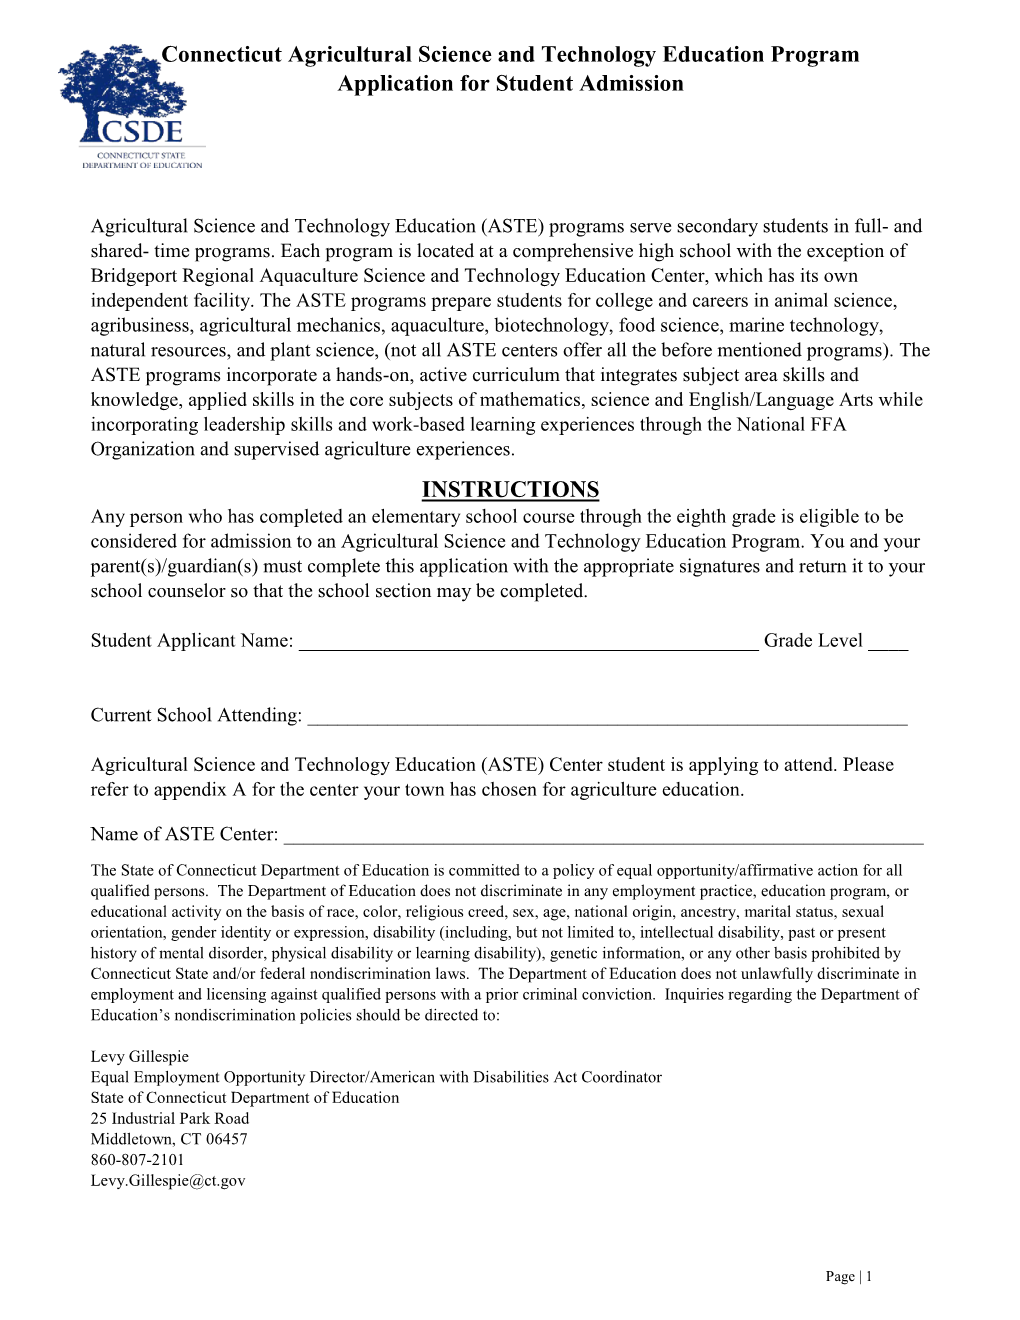 Connecticut Agricultural Science and Technology Education Program Application for Student Admission